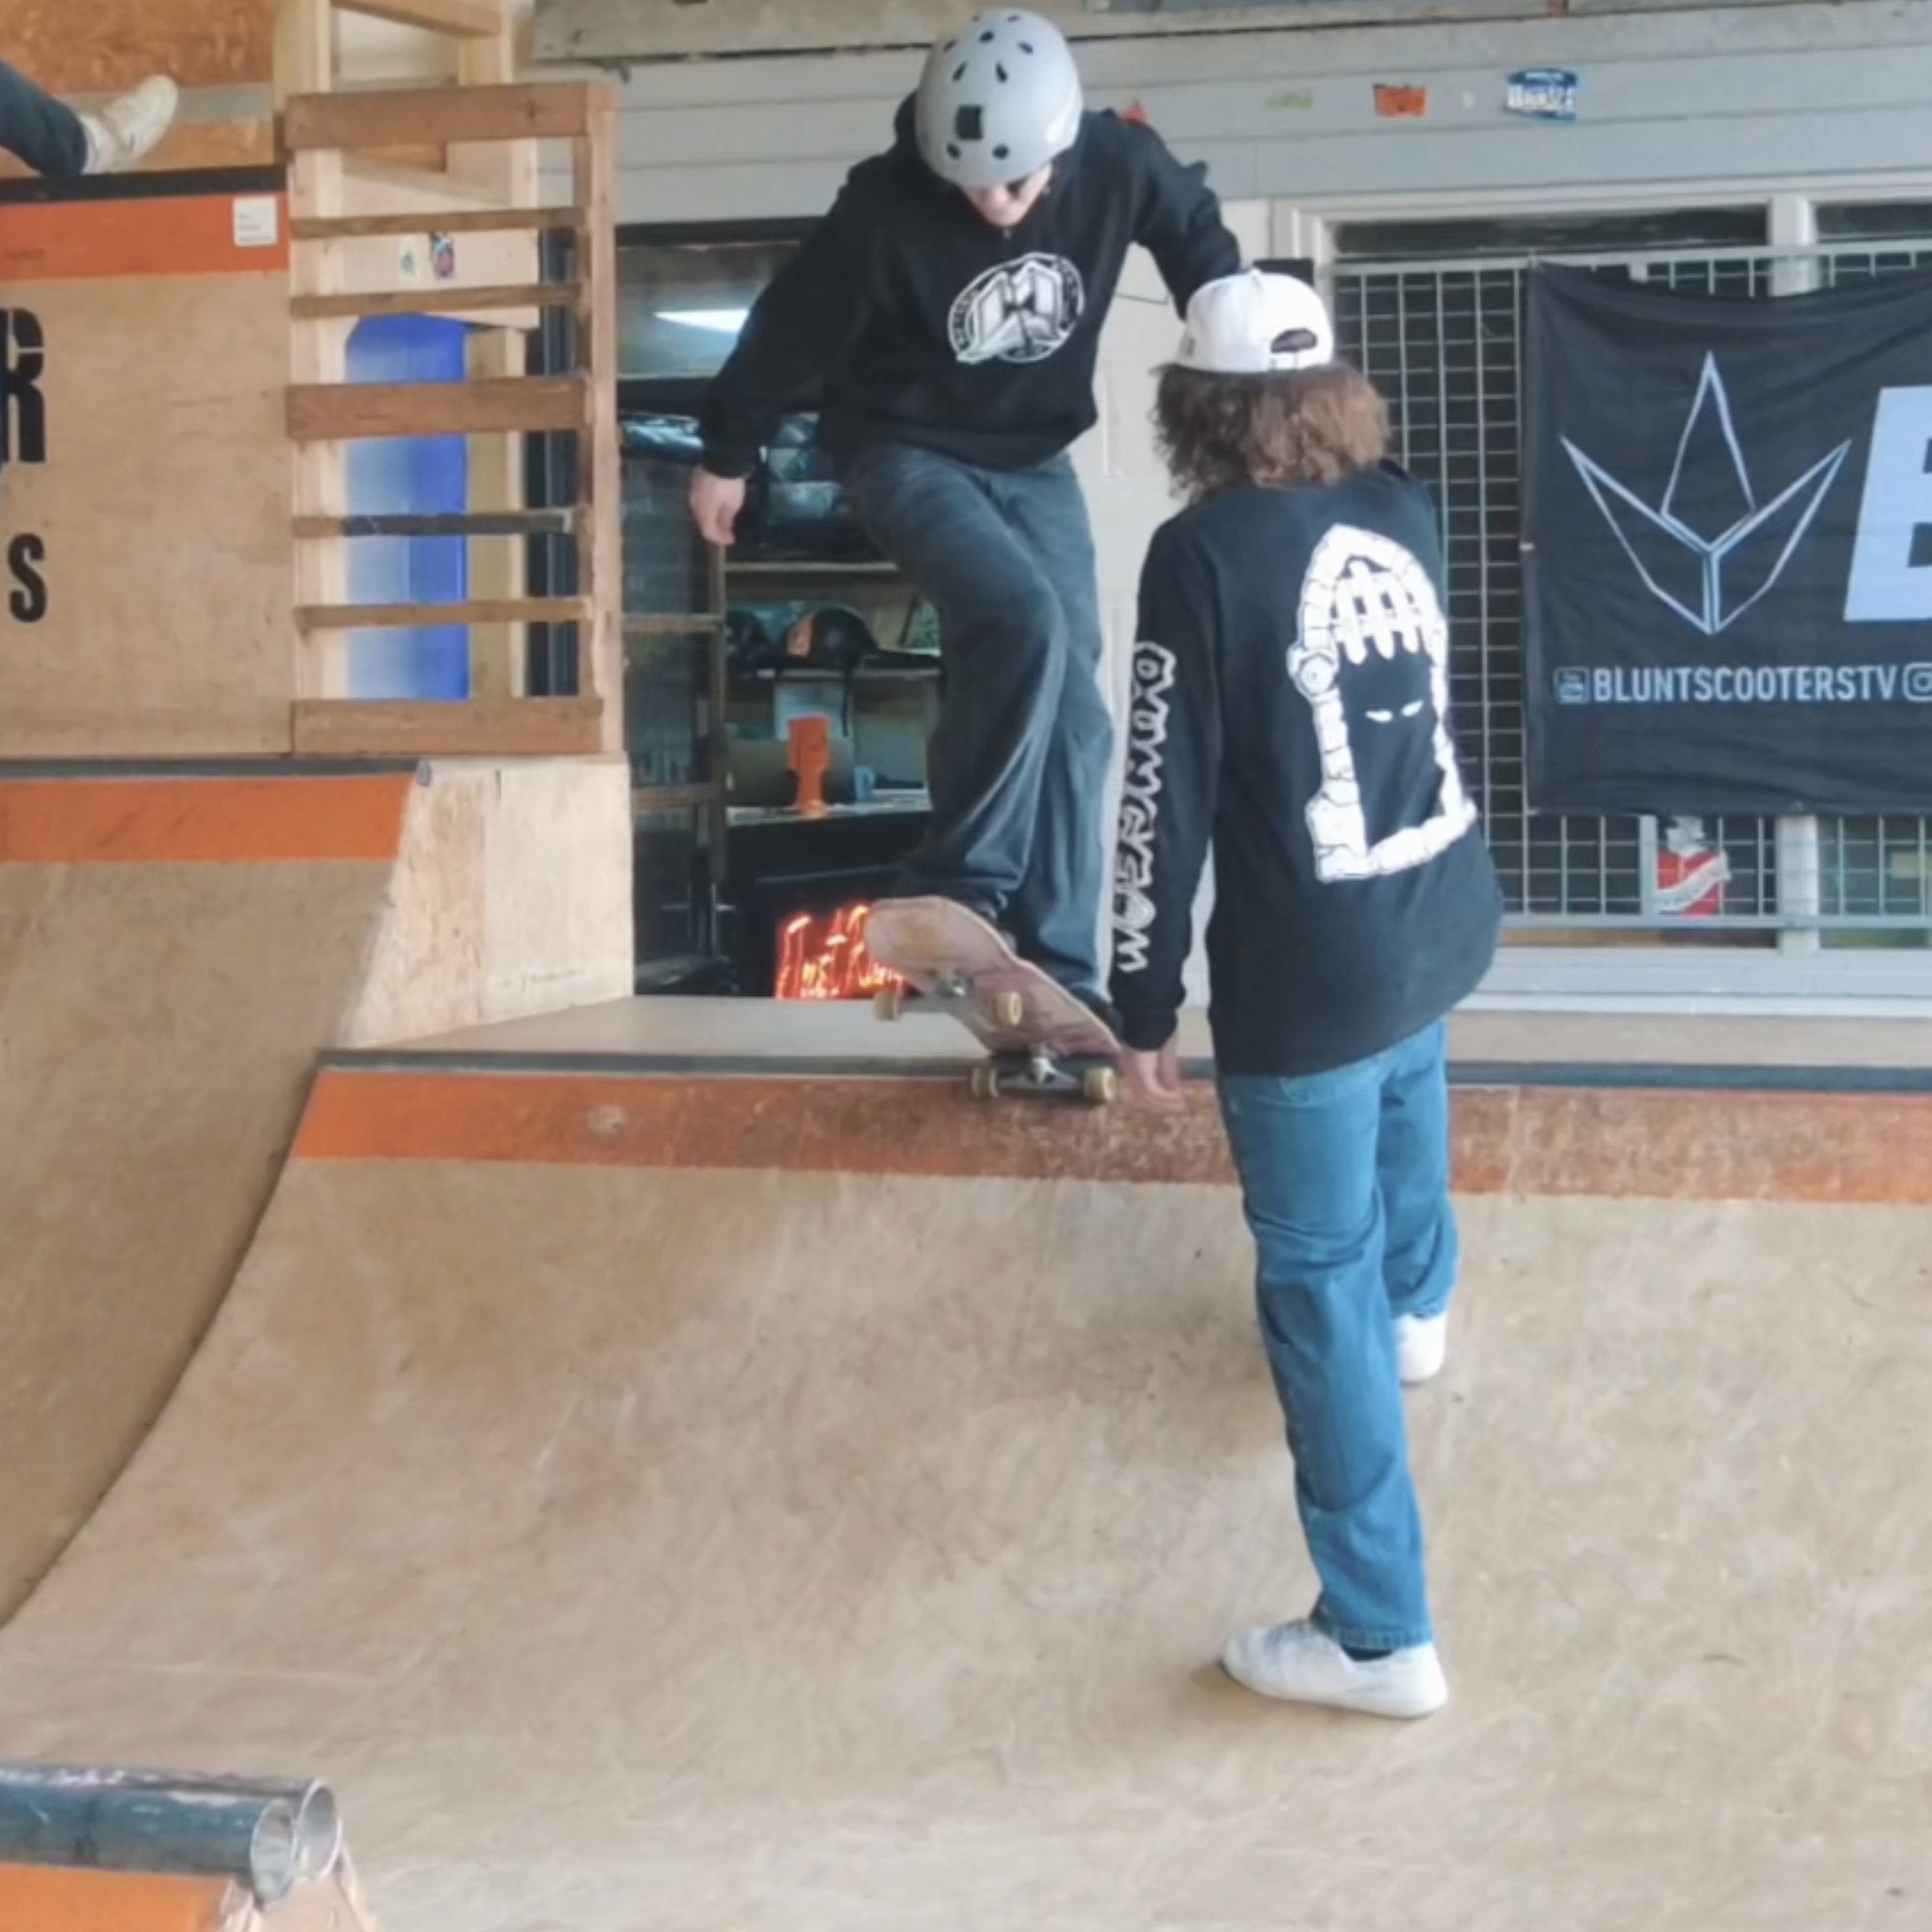 Skateboard, Scooter and BMX Lessons at Just Ramps Indoor Skatepark - Just Ramps Skatepark